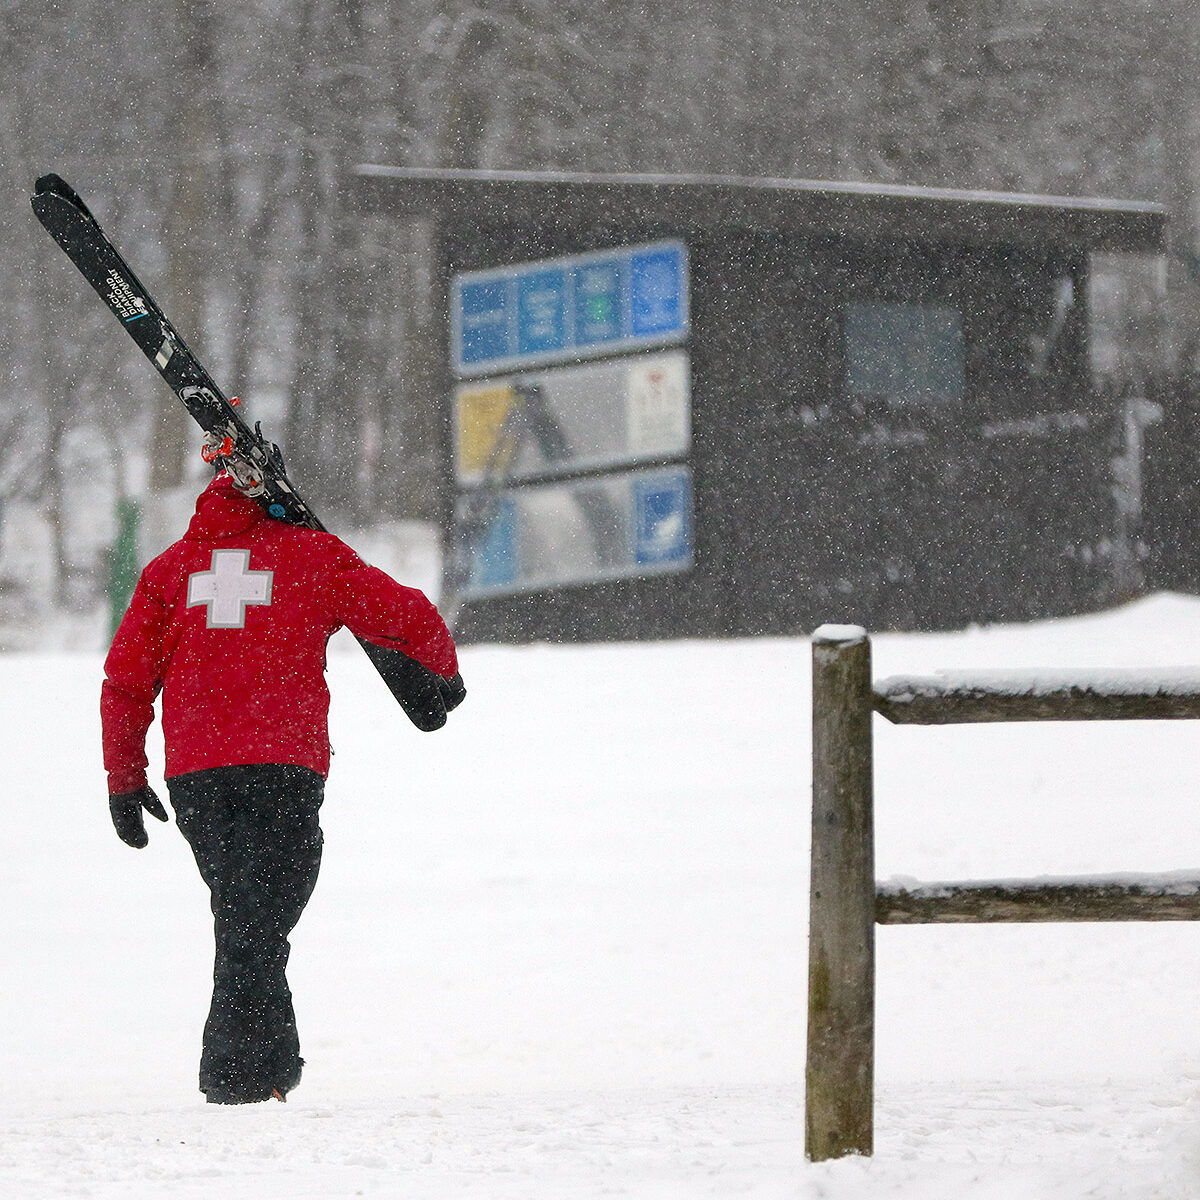 An image of a ski patroller walking through snowfall during a January storm in the main base area of Bolton Valley Ski Resort in Vermont